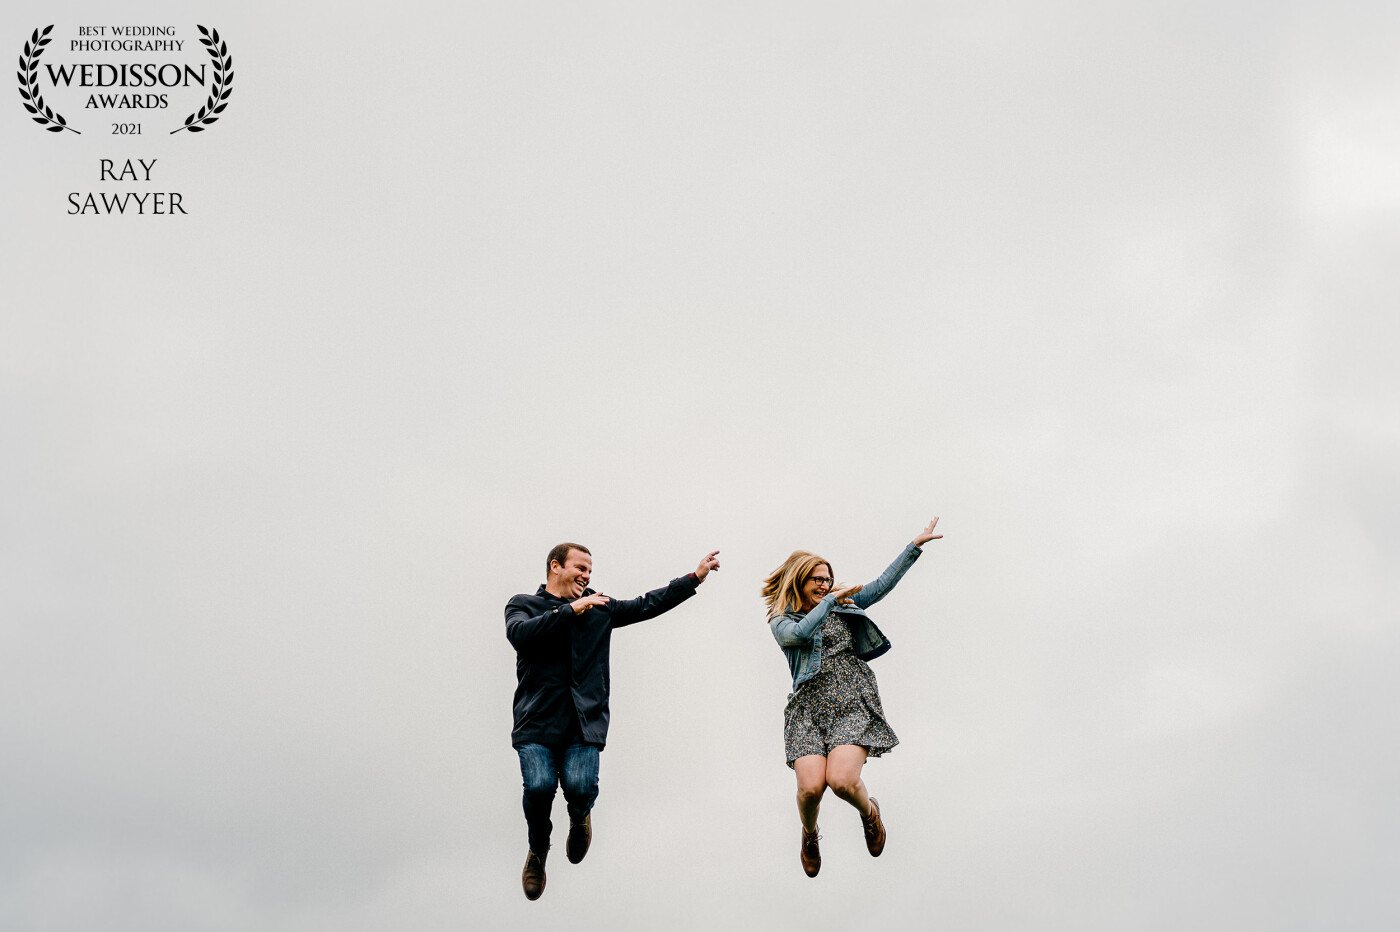 Love a but of fun - This engagement session was great. we approached the summit of a hill and I asked them to jump in the air and do something funky like a 'dab' and the image came out great.